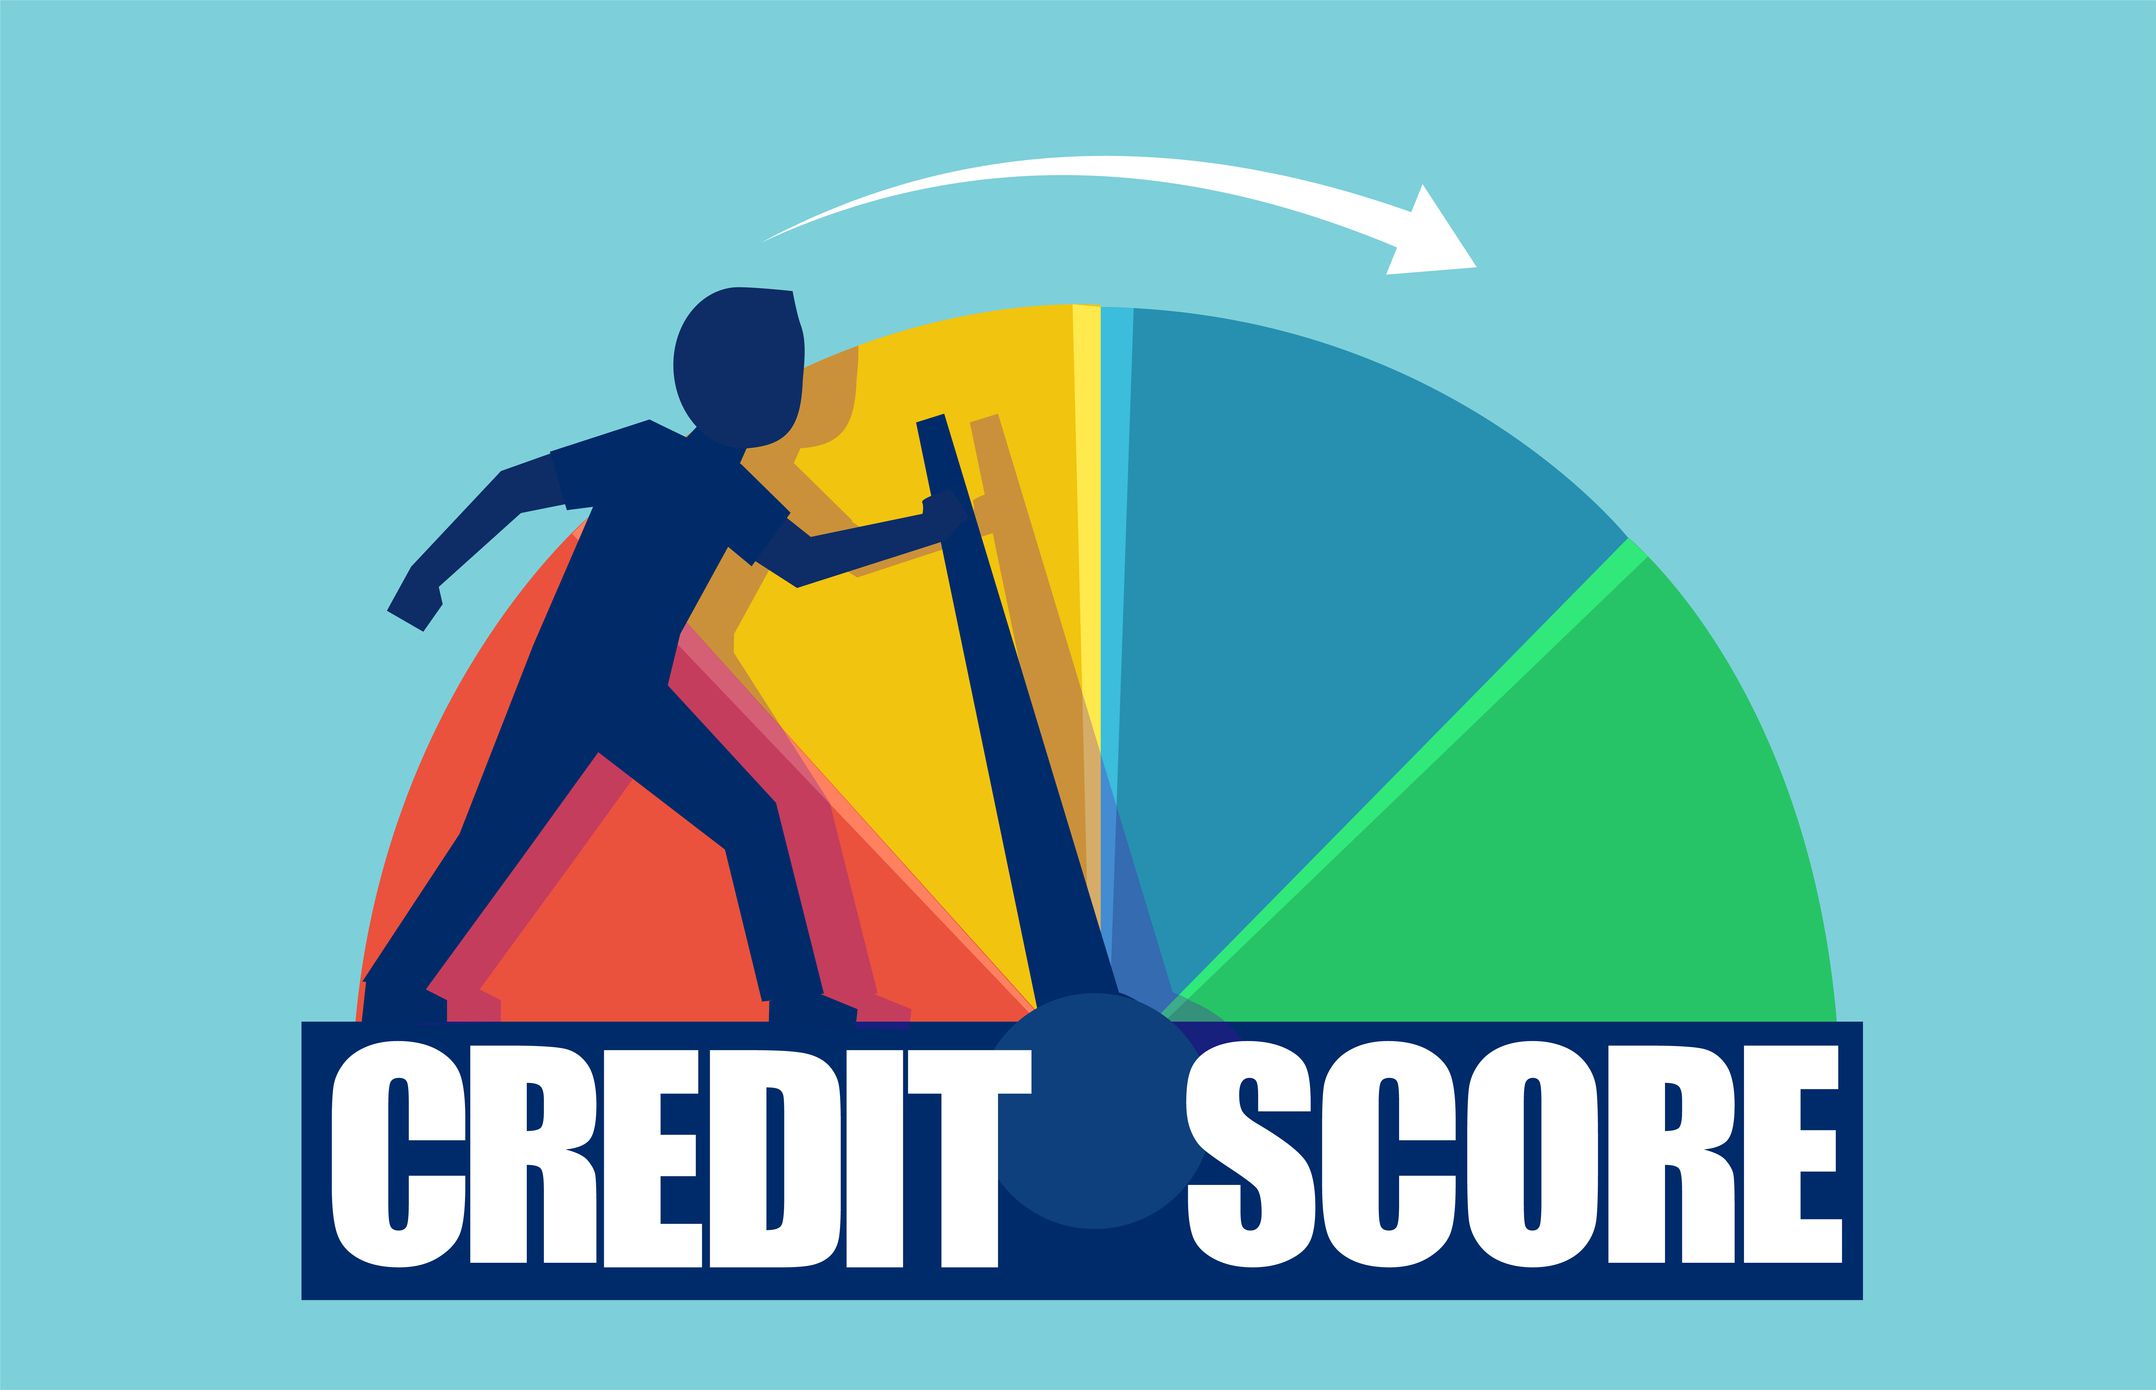 What Credit Score Do You Need to Buy a Car in 2020?